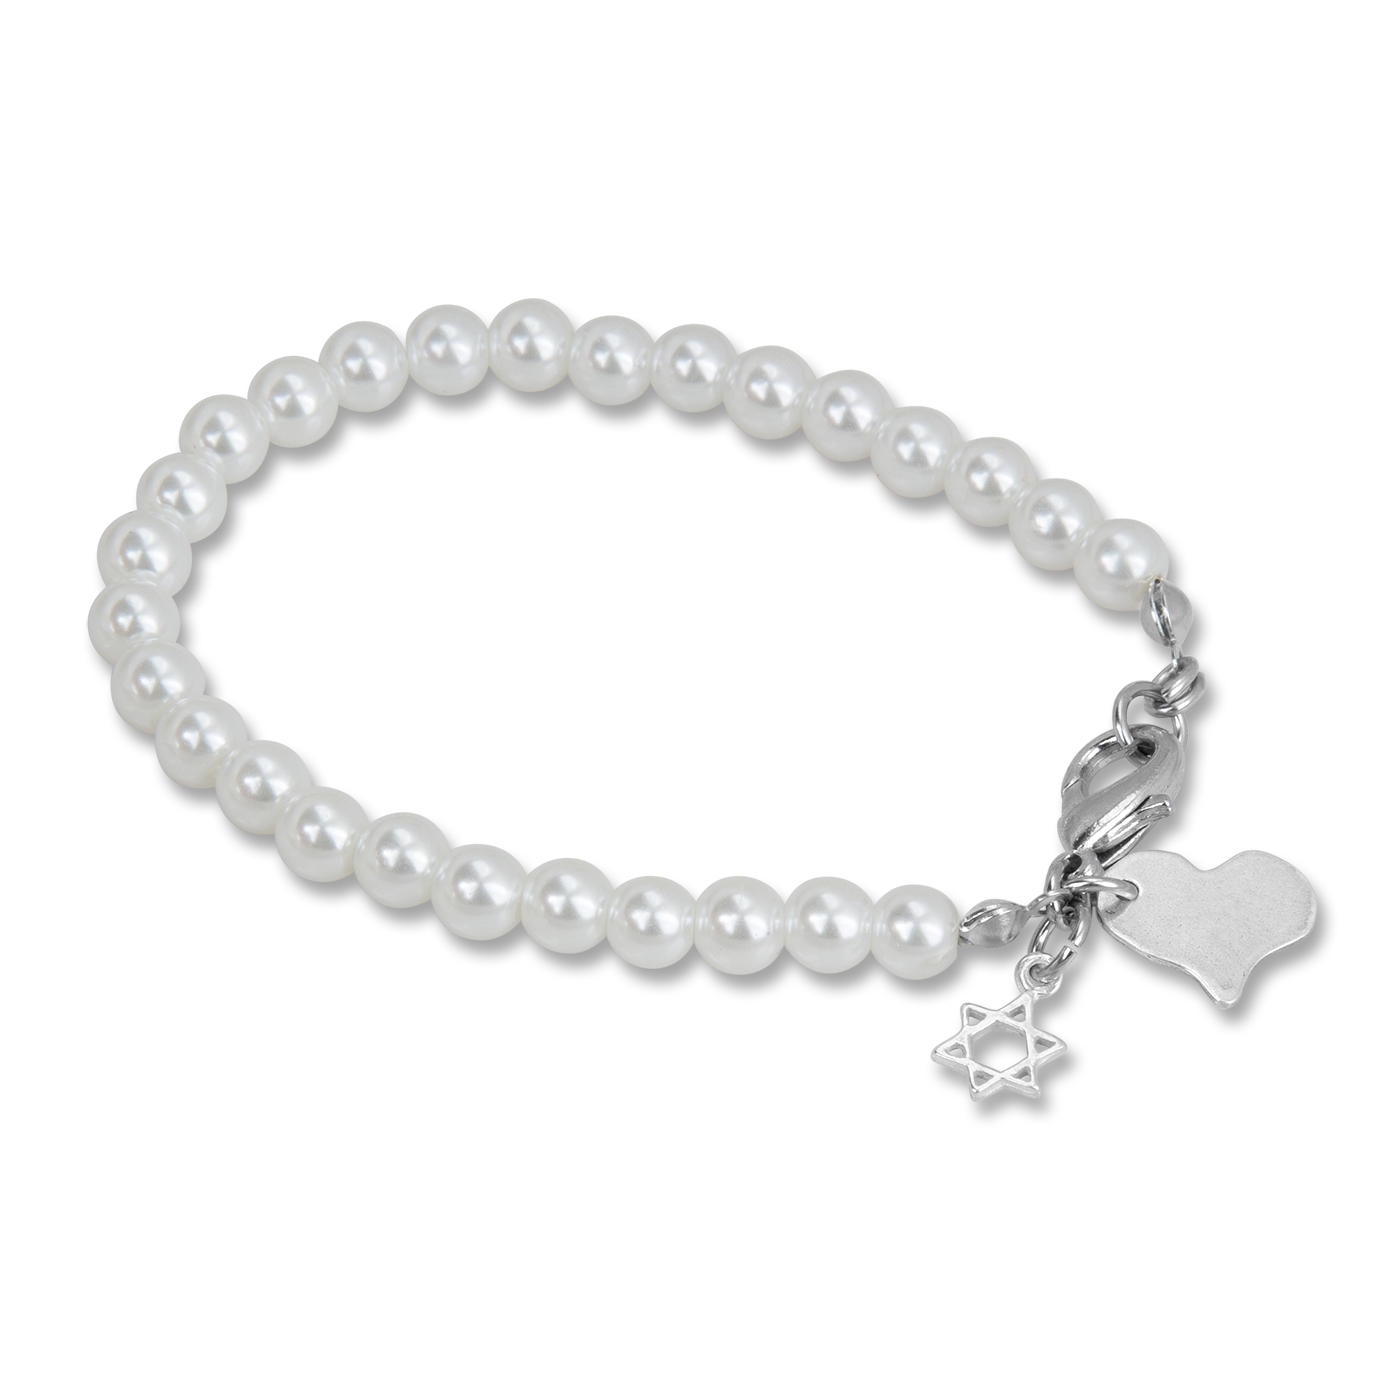 Pearl and Silver Bracelet - Heart and Star by Or Jewelry - 1